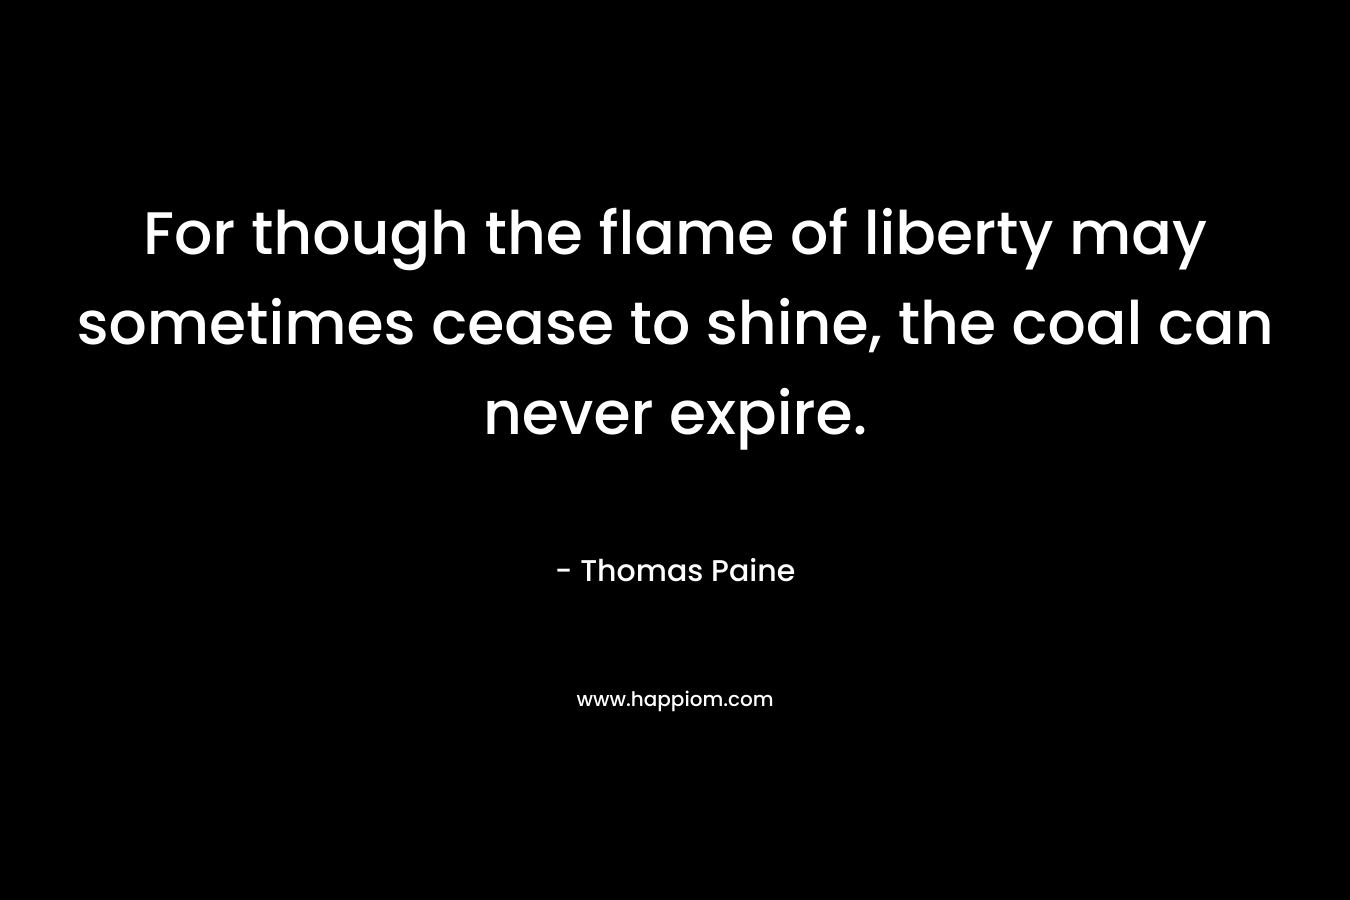 For though the flame of liberty may sometimes cease to shine, the coal can never expire.